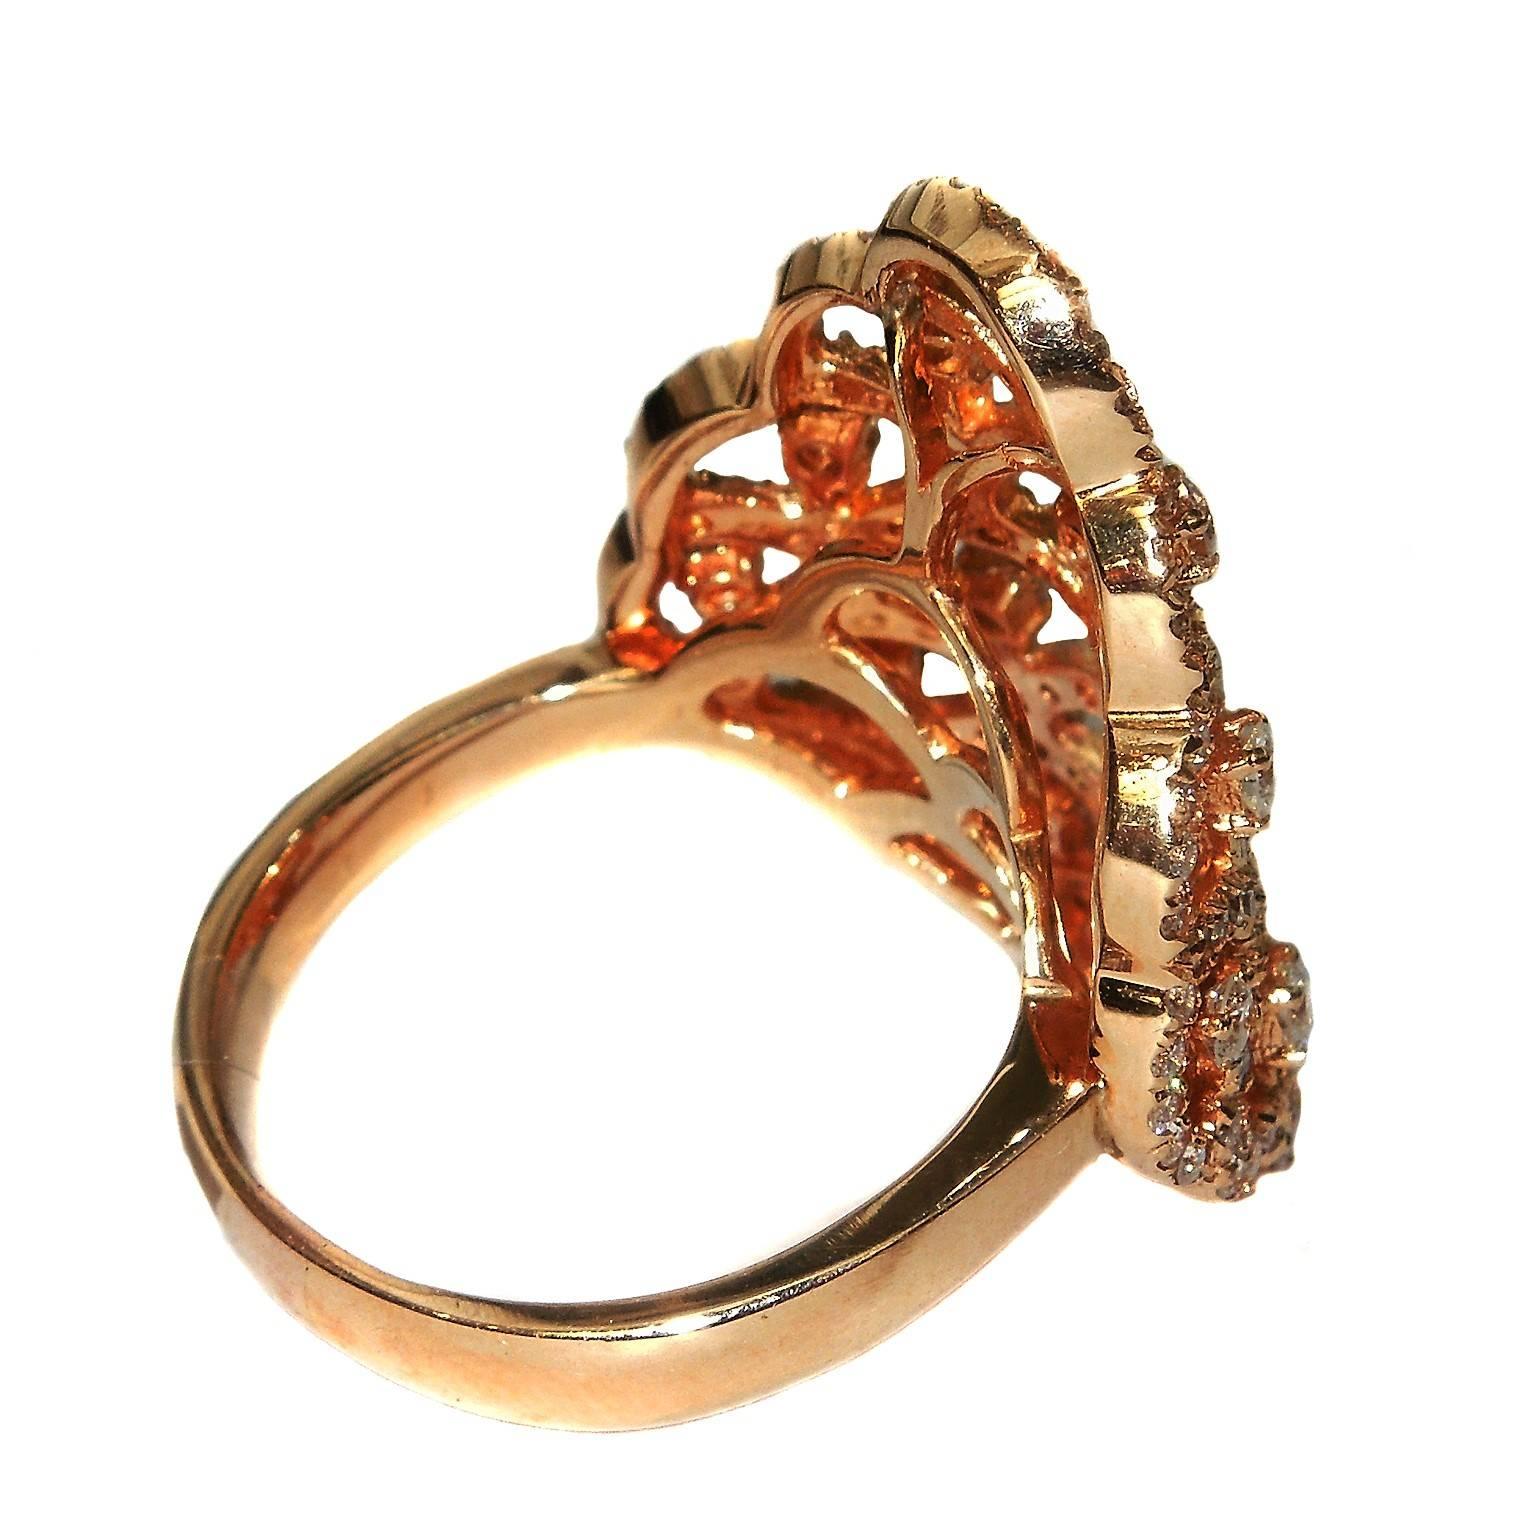 18K Pink Gold Ring with Diamonds

1.83ct. G Color, VS Clarity Diamonds

10.18 grams 18K Gold

Made in Turkey. 

Currently size 8 but can be sized up or down.

Estate